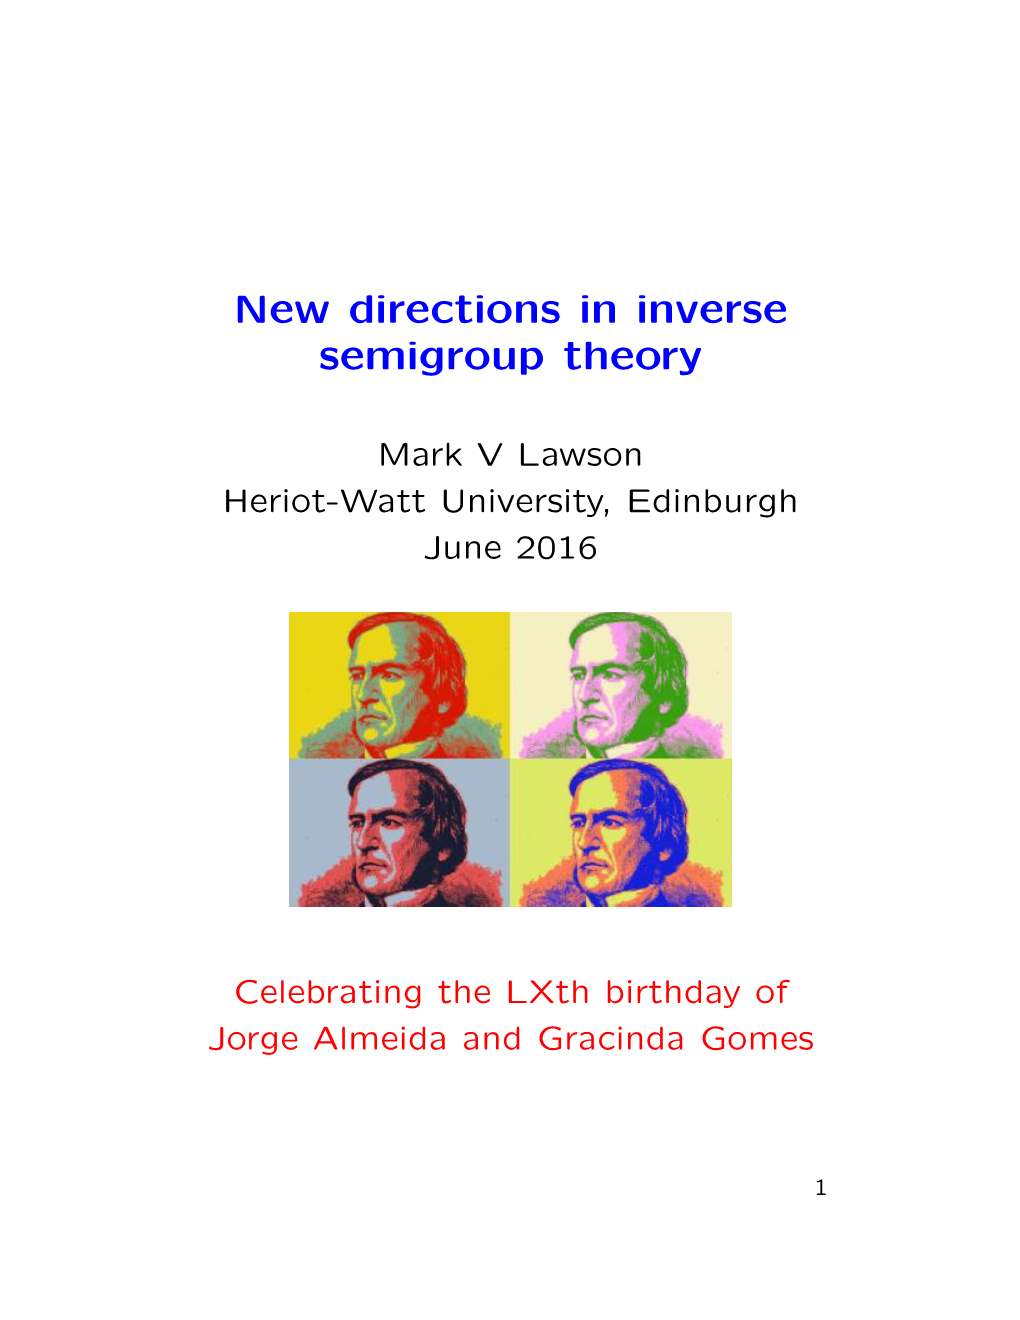 New Directions in Inverse Semigroup Theory